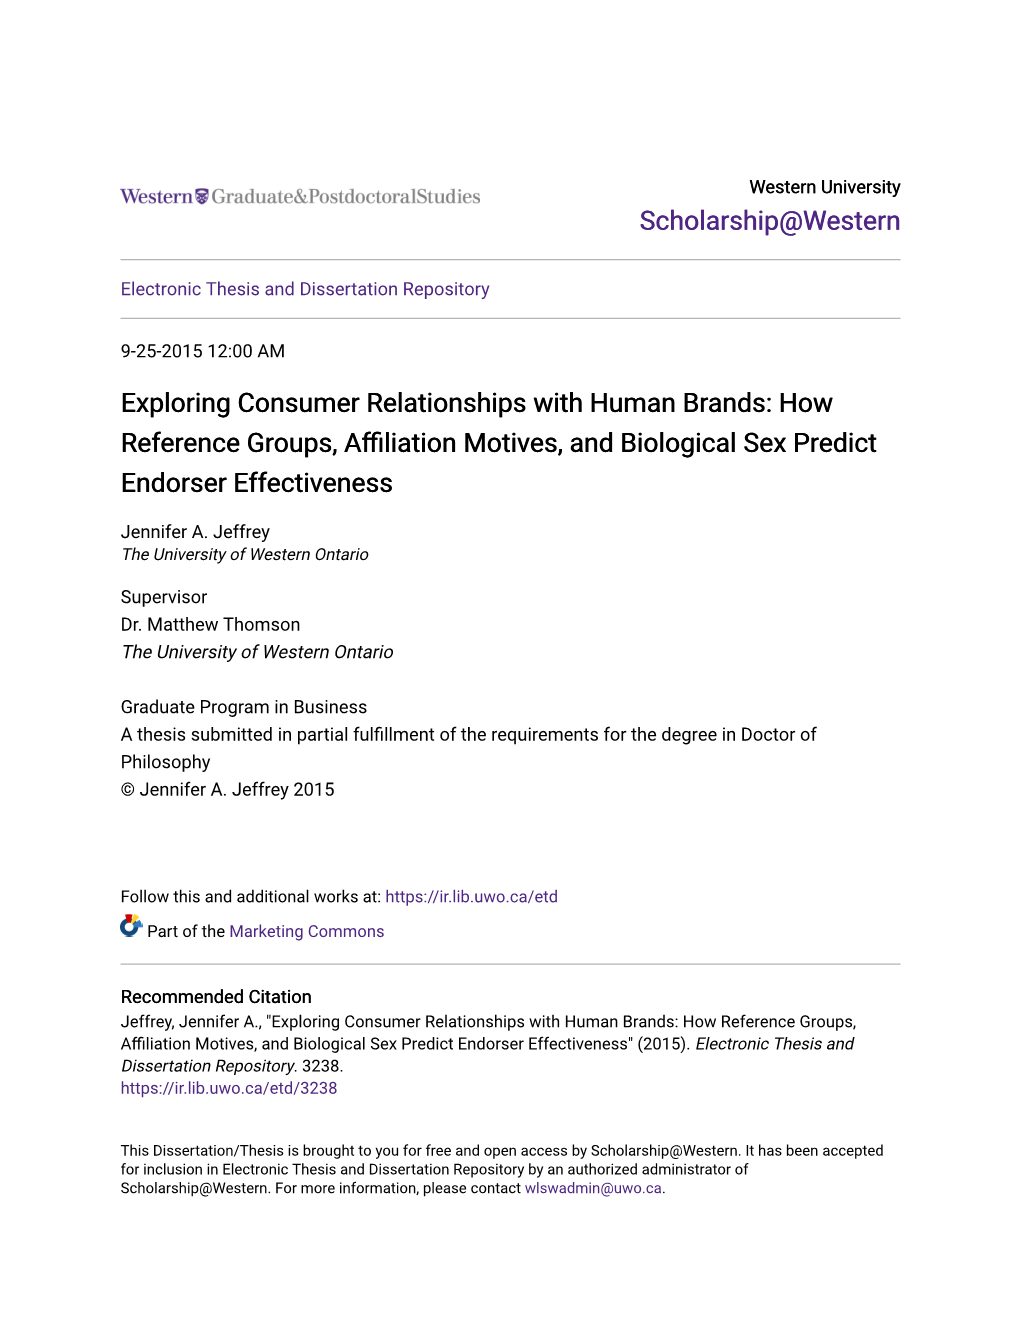 Exploring Consumer Relationships with Human Brands: How Reference Groups, Affiliation Motives, and Biological Sex Predict Endorser Effectiveness